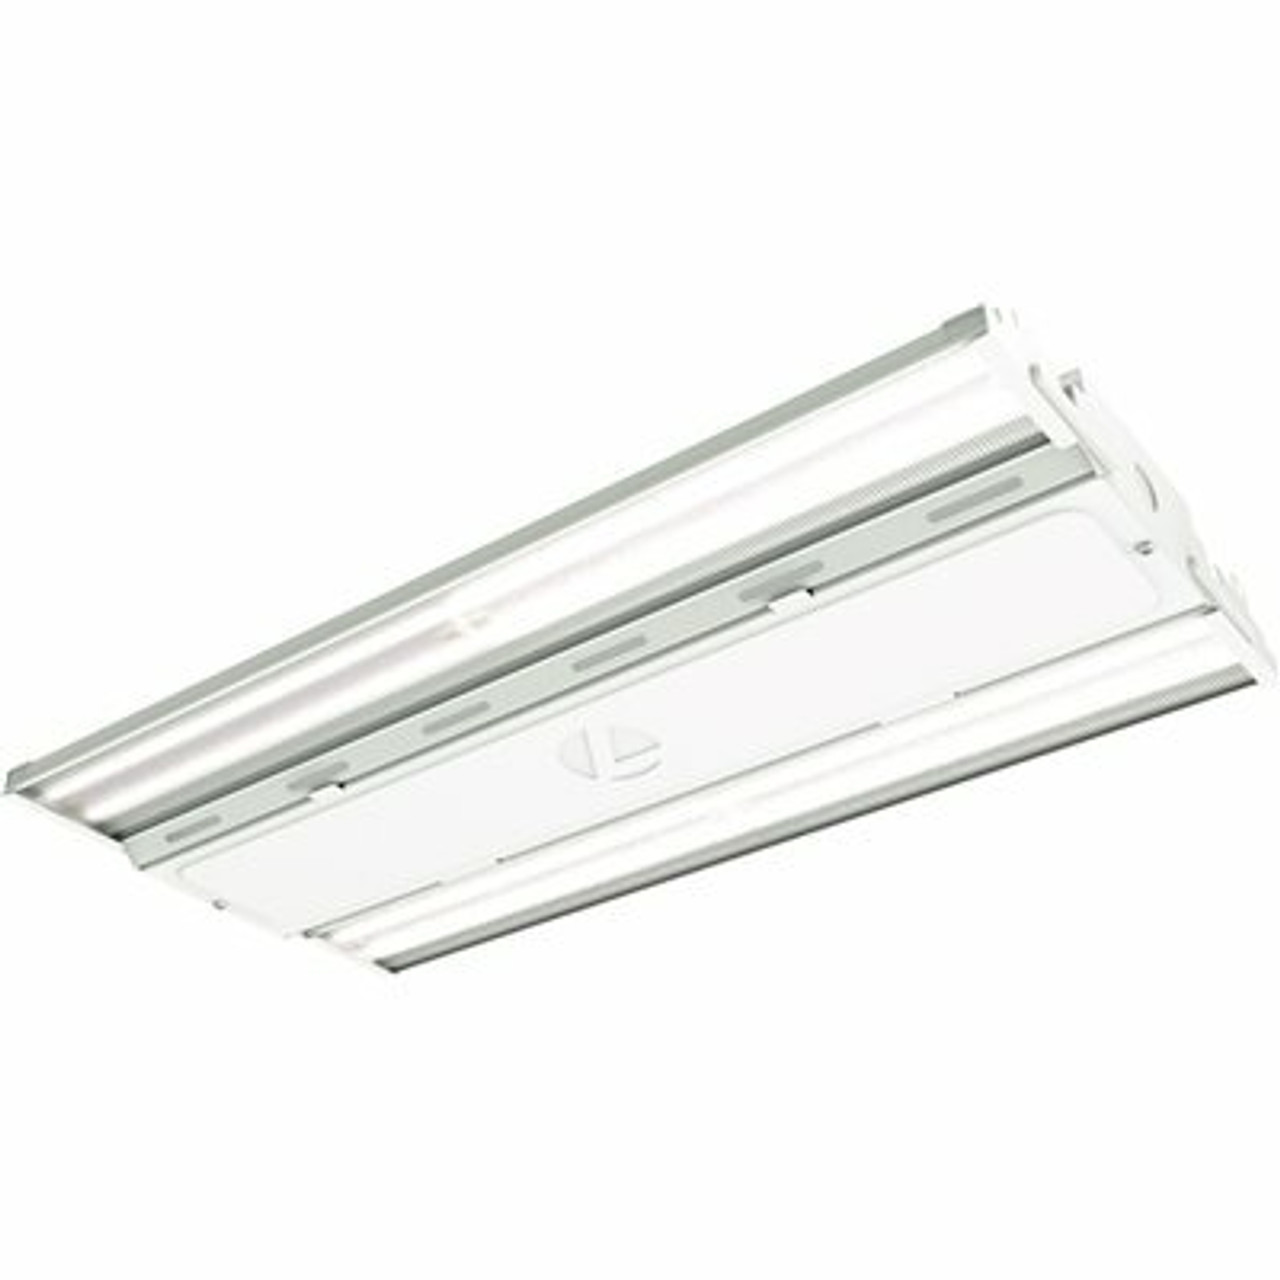 Lithonia Lighting Contractor Select 1.9 Ft. 400-Watt Equivalent Integrated Led Dimmable White High Bay Light, 4000K